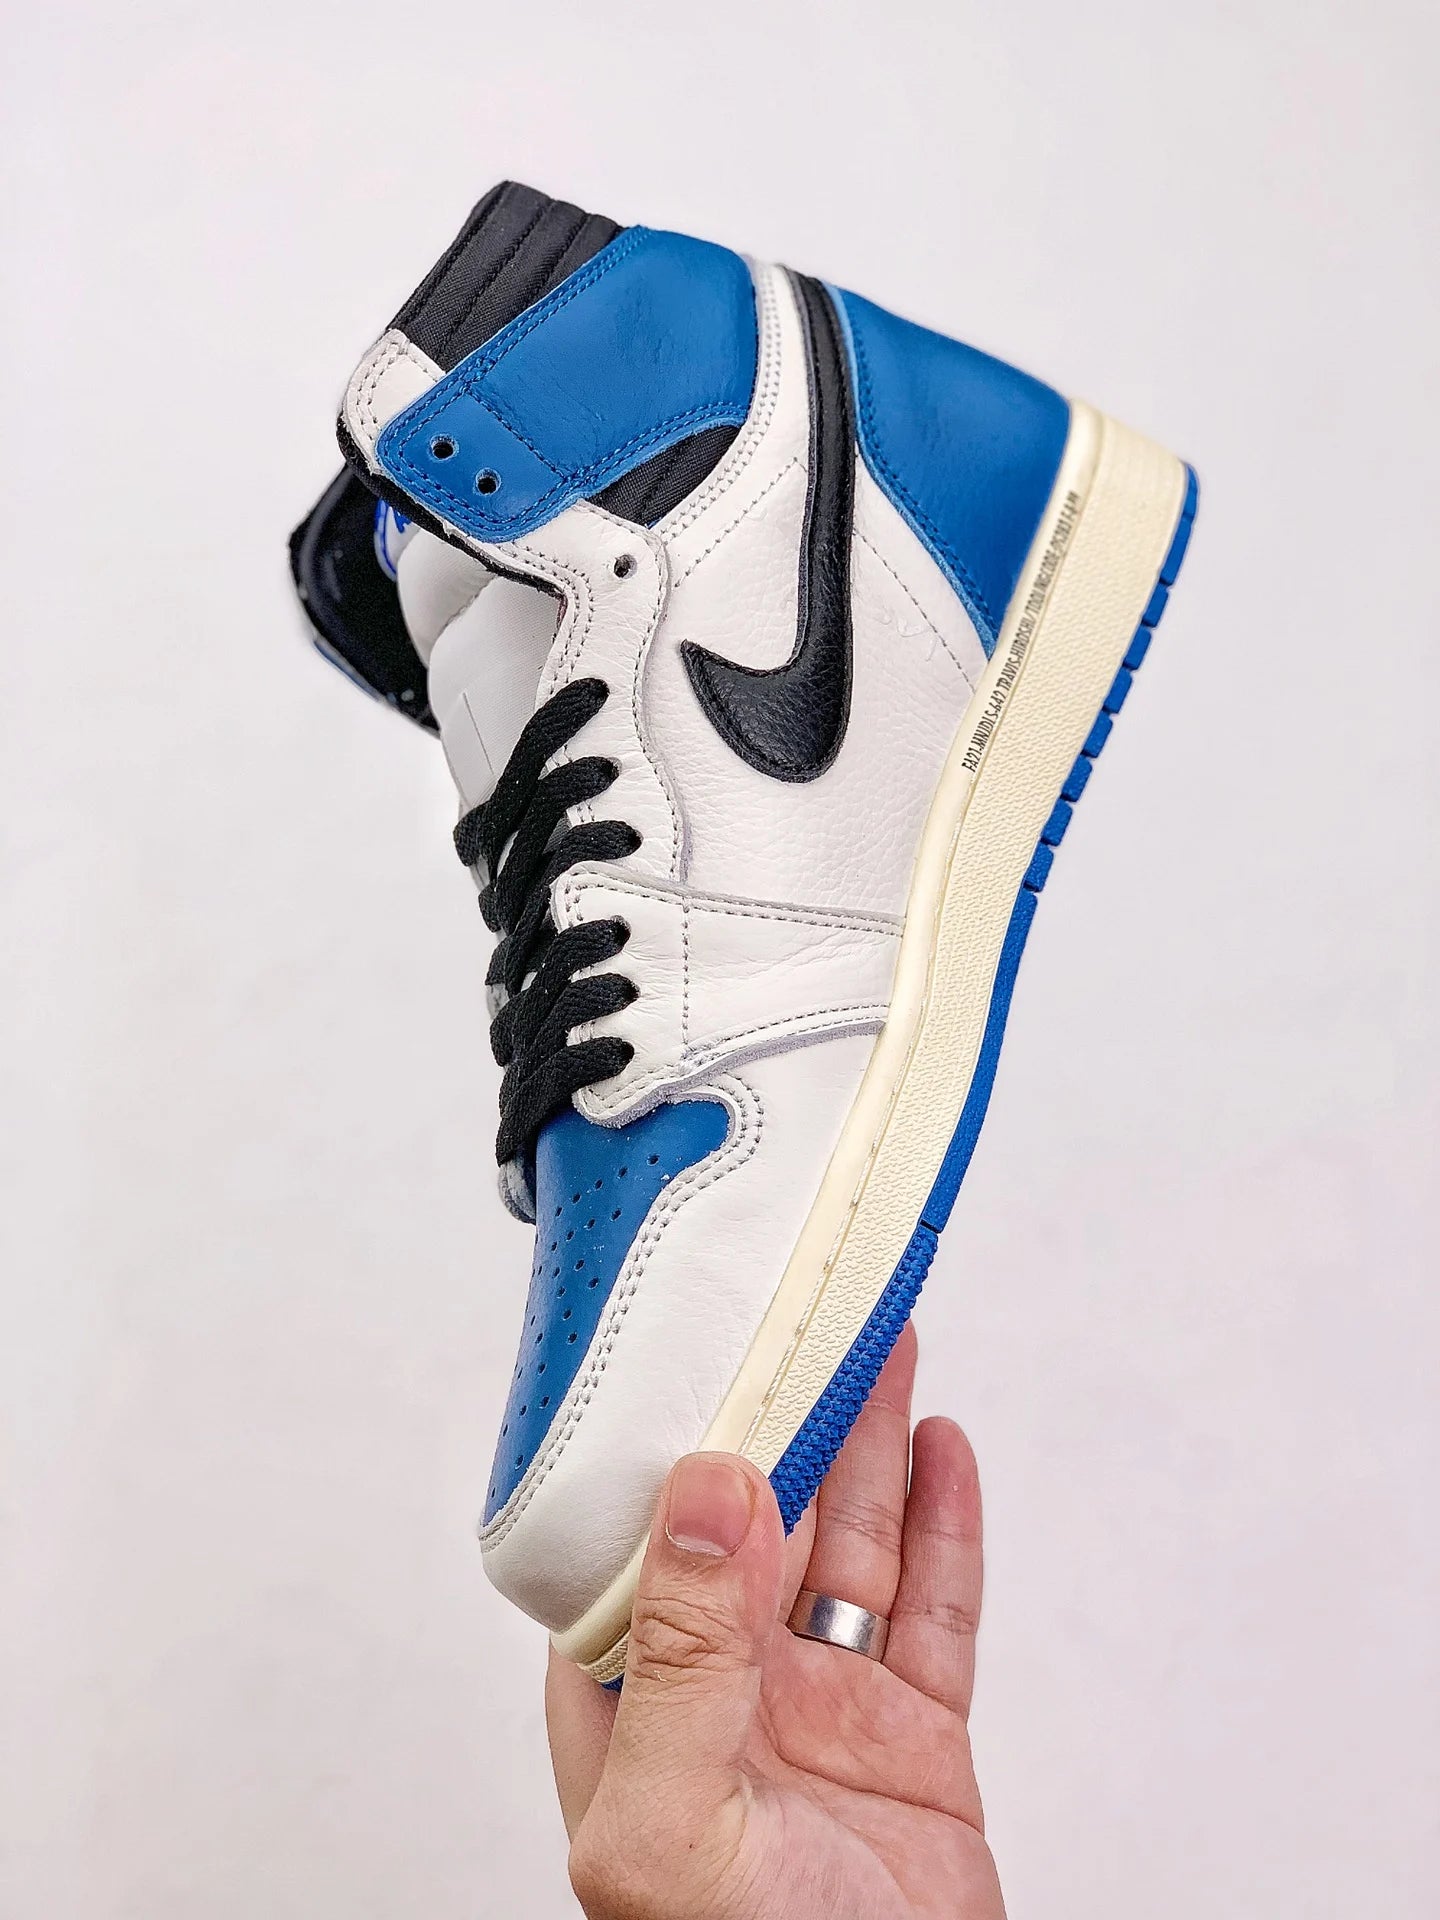 Blue and white high shoes